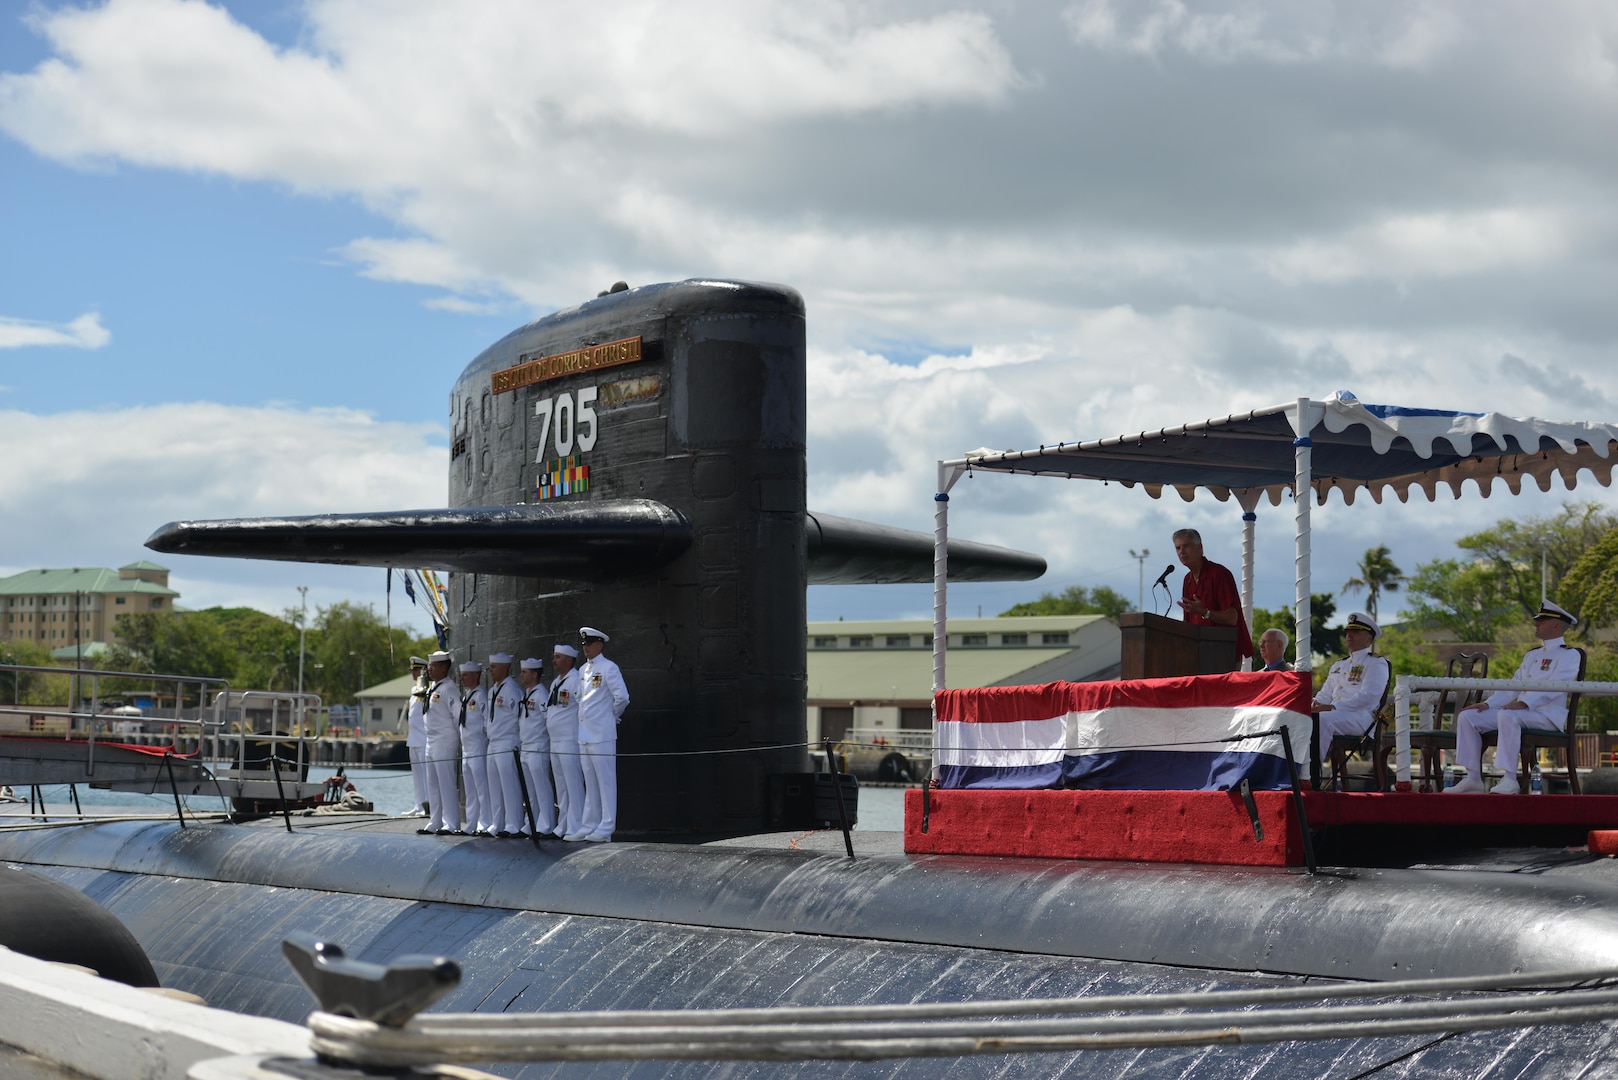 160530-N-LY160-181 JOINT BASE PEARL HARBOR-HICKAM, Hawaii (May 30, 2016) Mark Scott, a city councilman of Corpus Christi, Texas, addresses Memorial Day guests at the Los Angeles-class fast-attack submarine USS City of Corpus Christi (SSN 705) decommissioning ceremony at Joint Base Pearl Harbor-Hickam. City of Corpus Christi concluded 33 years of service as the second U.S. warship to be named after Corpus Christi, Texas. (U.S. Navy photo by Mass Communication Specialist 2nd Class Michael H. Lee)